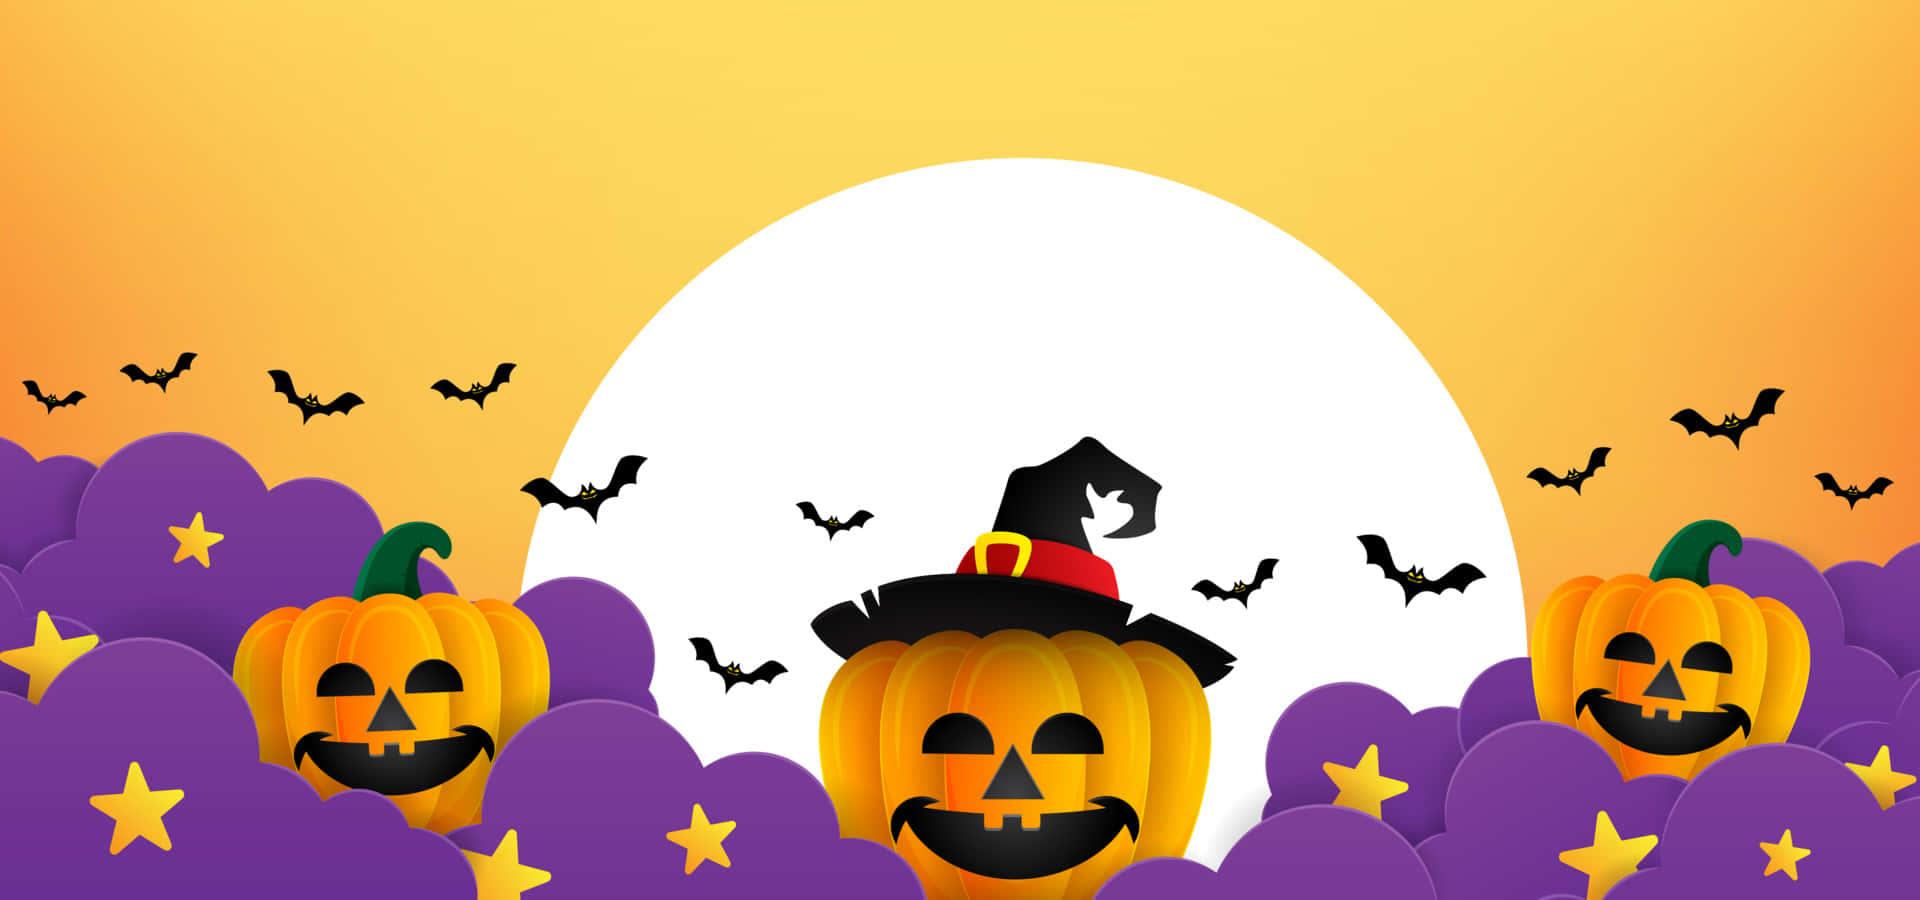 Download Halloween Theme Background | Wallpapers.com